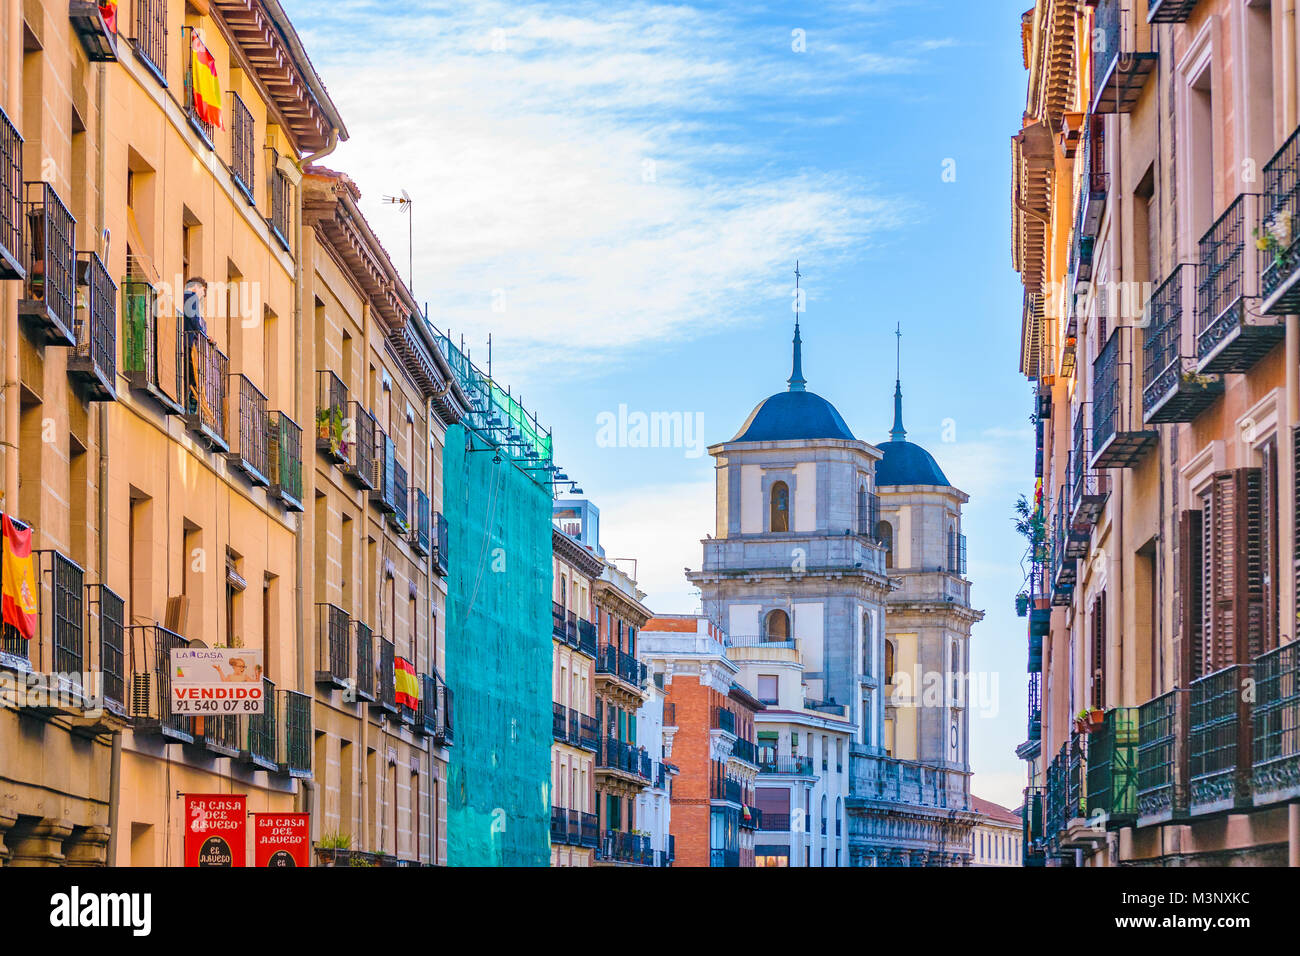 MADRID, SPAIN, DECEMBER - 2017 - Low angle view of eclectic style buildings at Madrid city, Spain Stock Photo